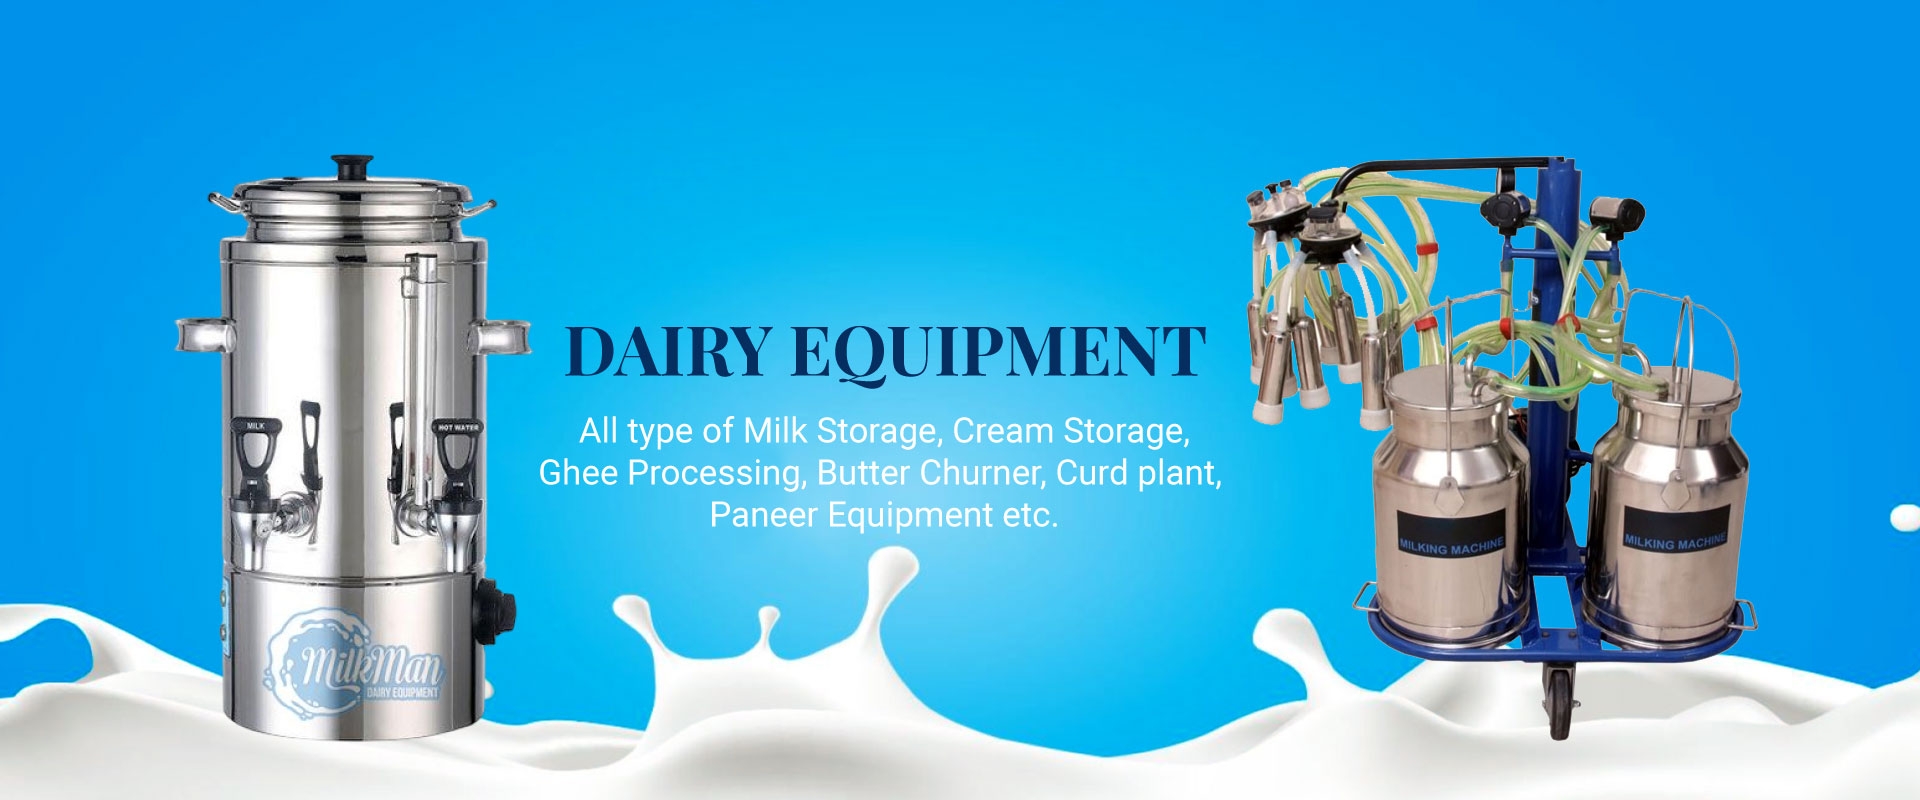 Dairy Equipment in Egypt